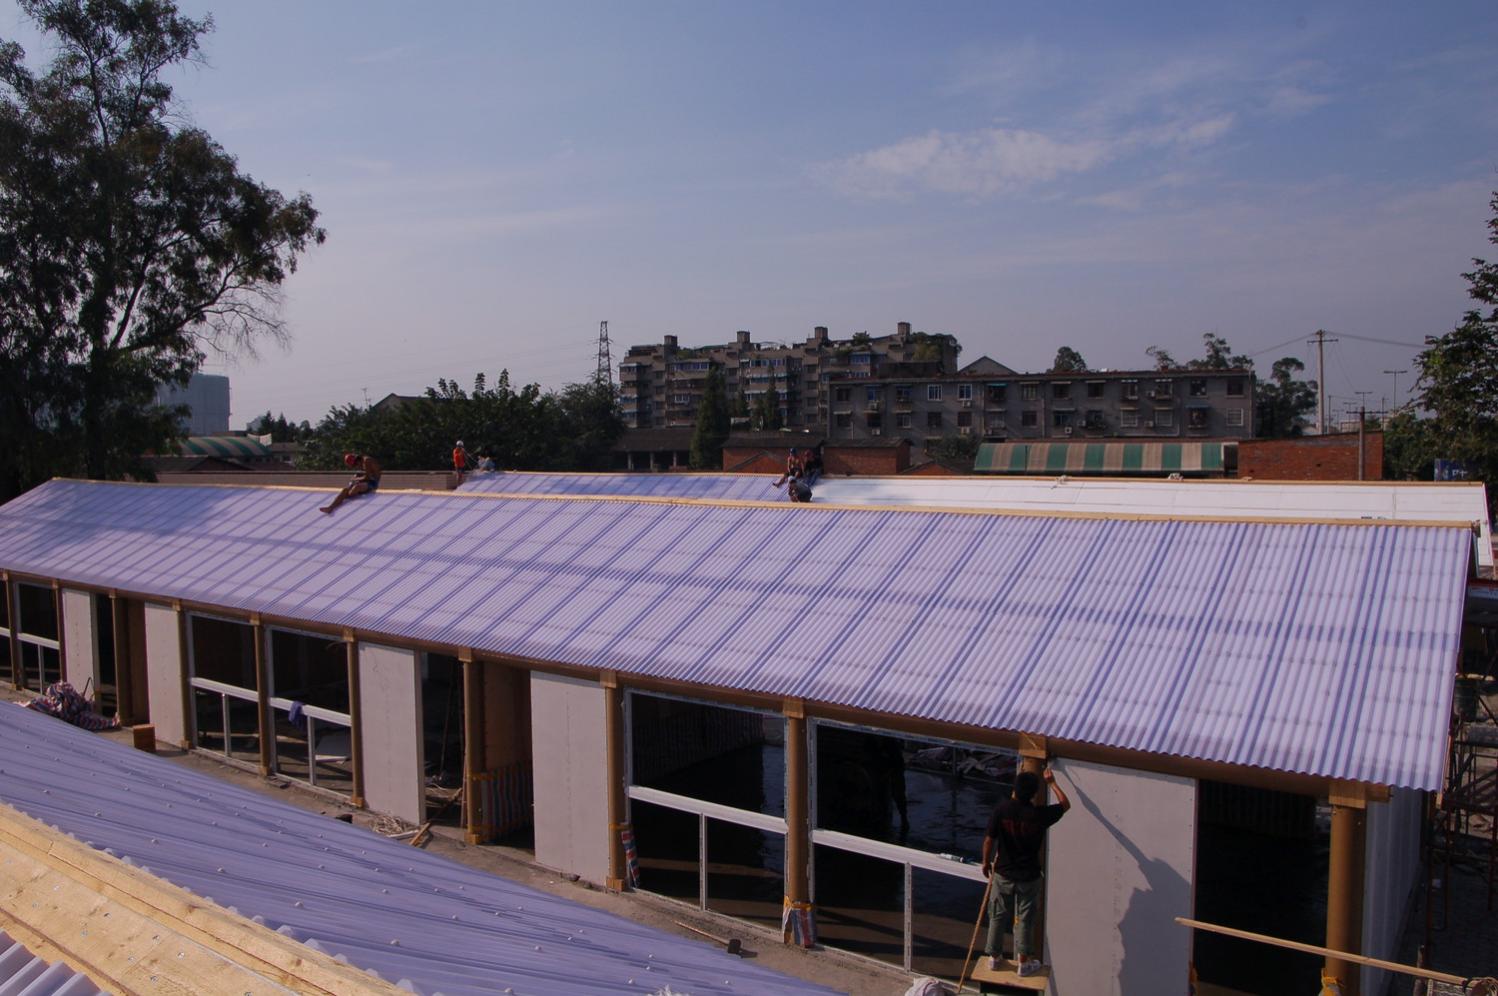 Construction of corrugated polycarbonate roofing